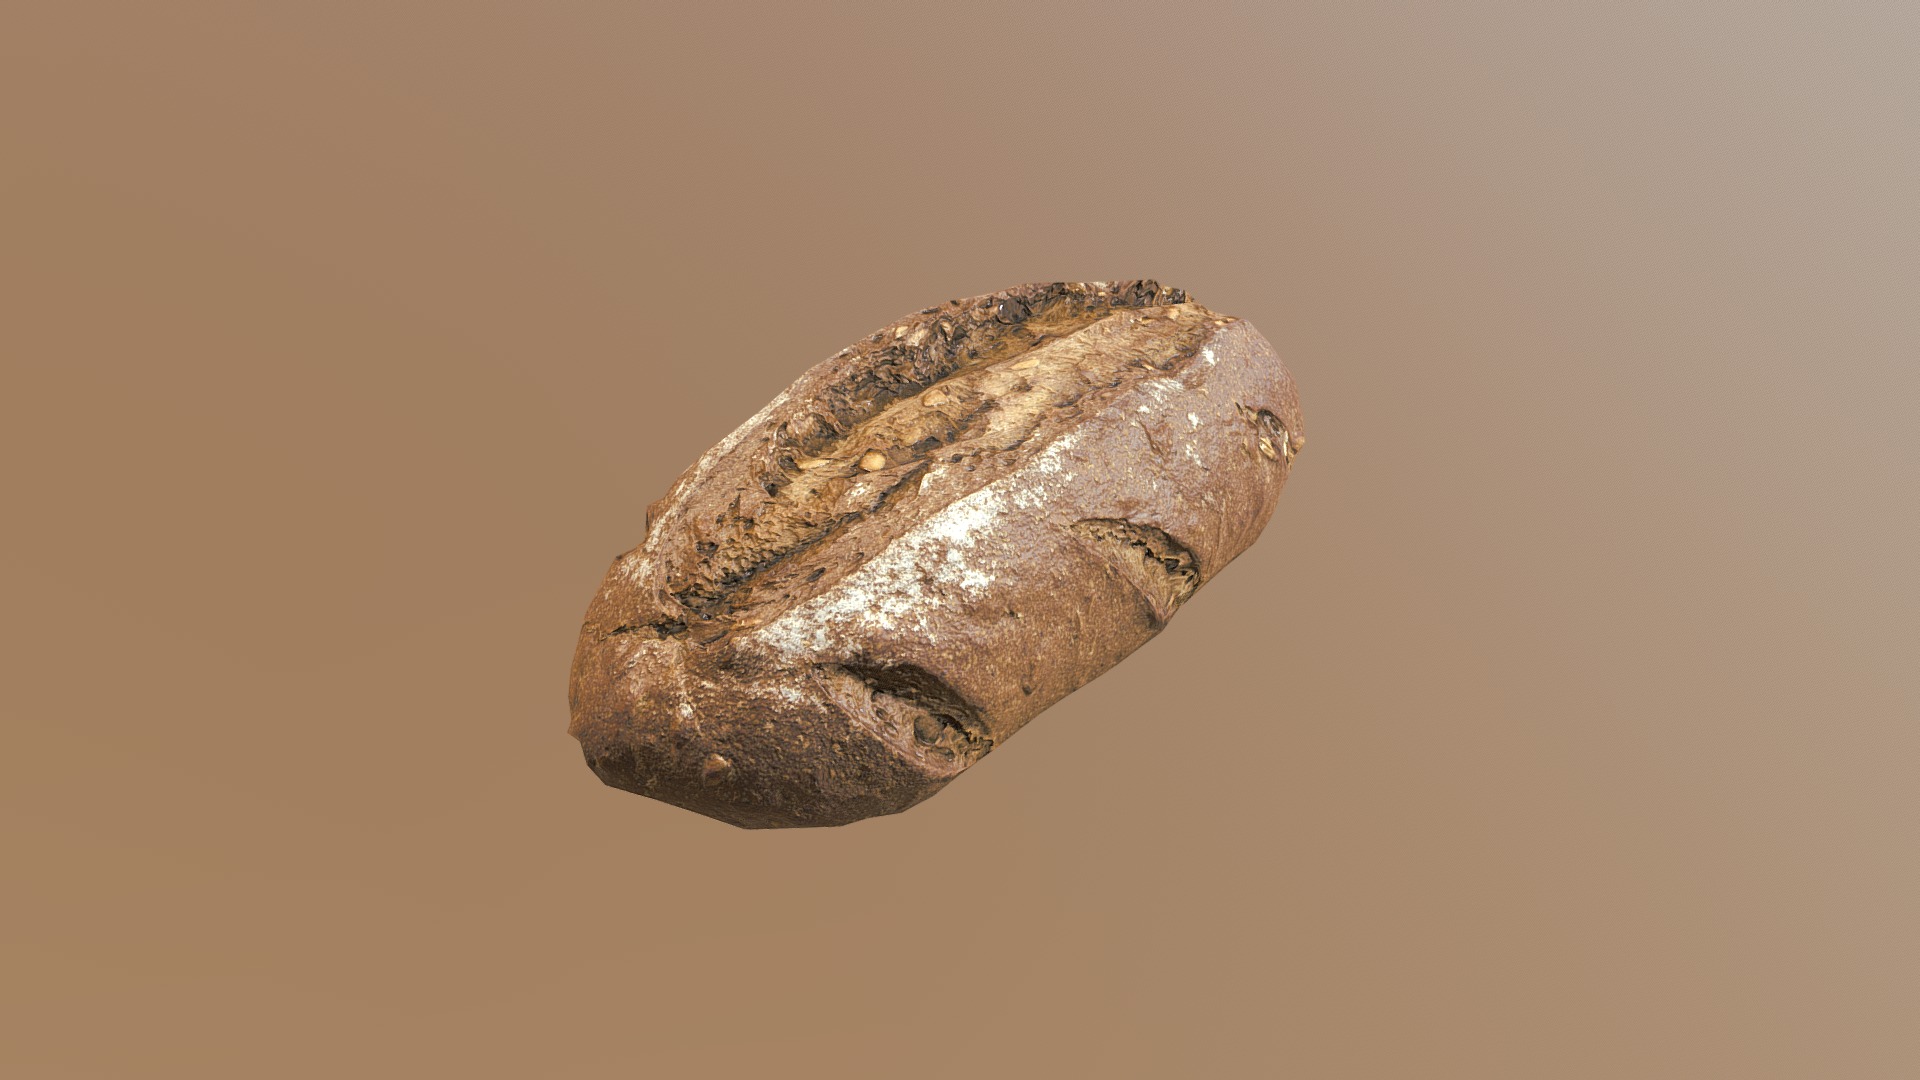 3D model TastyBreadPack vol.01 model one - This is a 3D model of the TastyBreadPack vol.01 model one. The 3D model is about a rock with a hole in it.